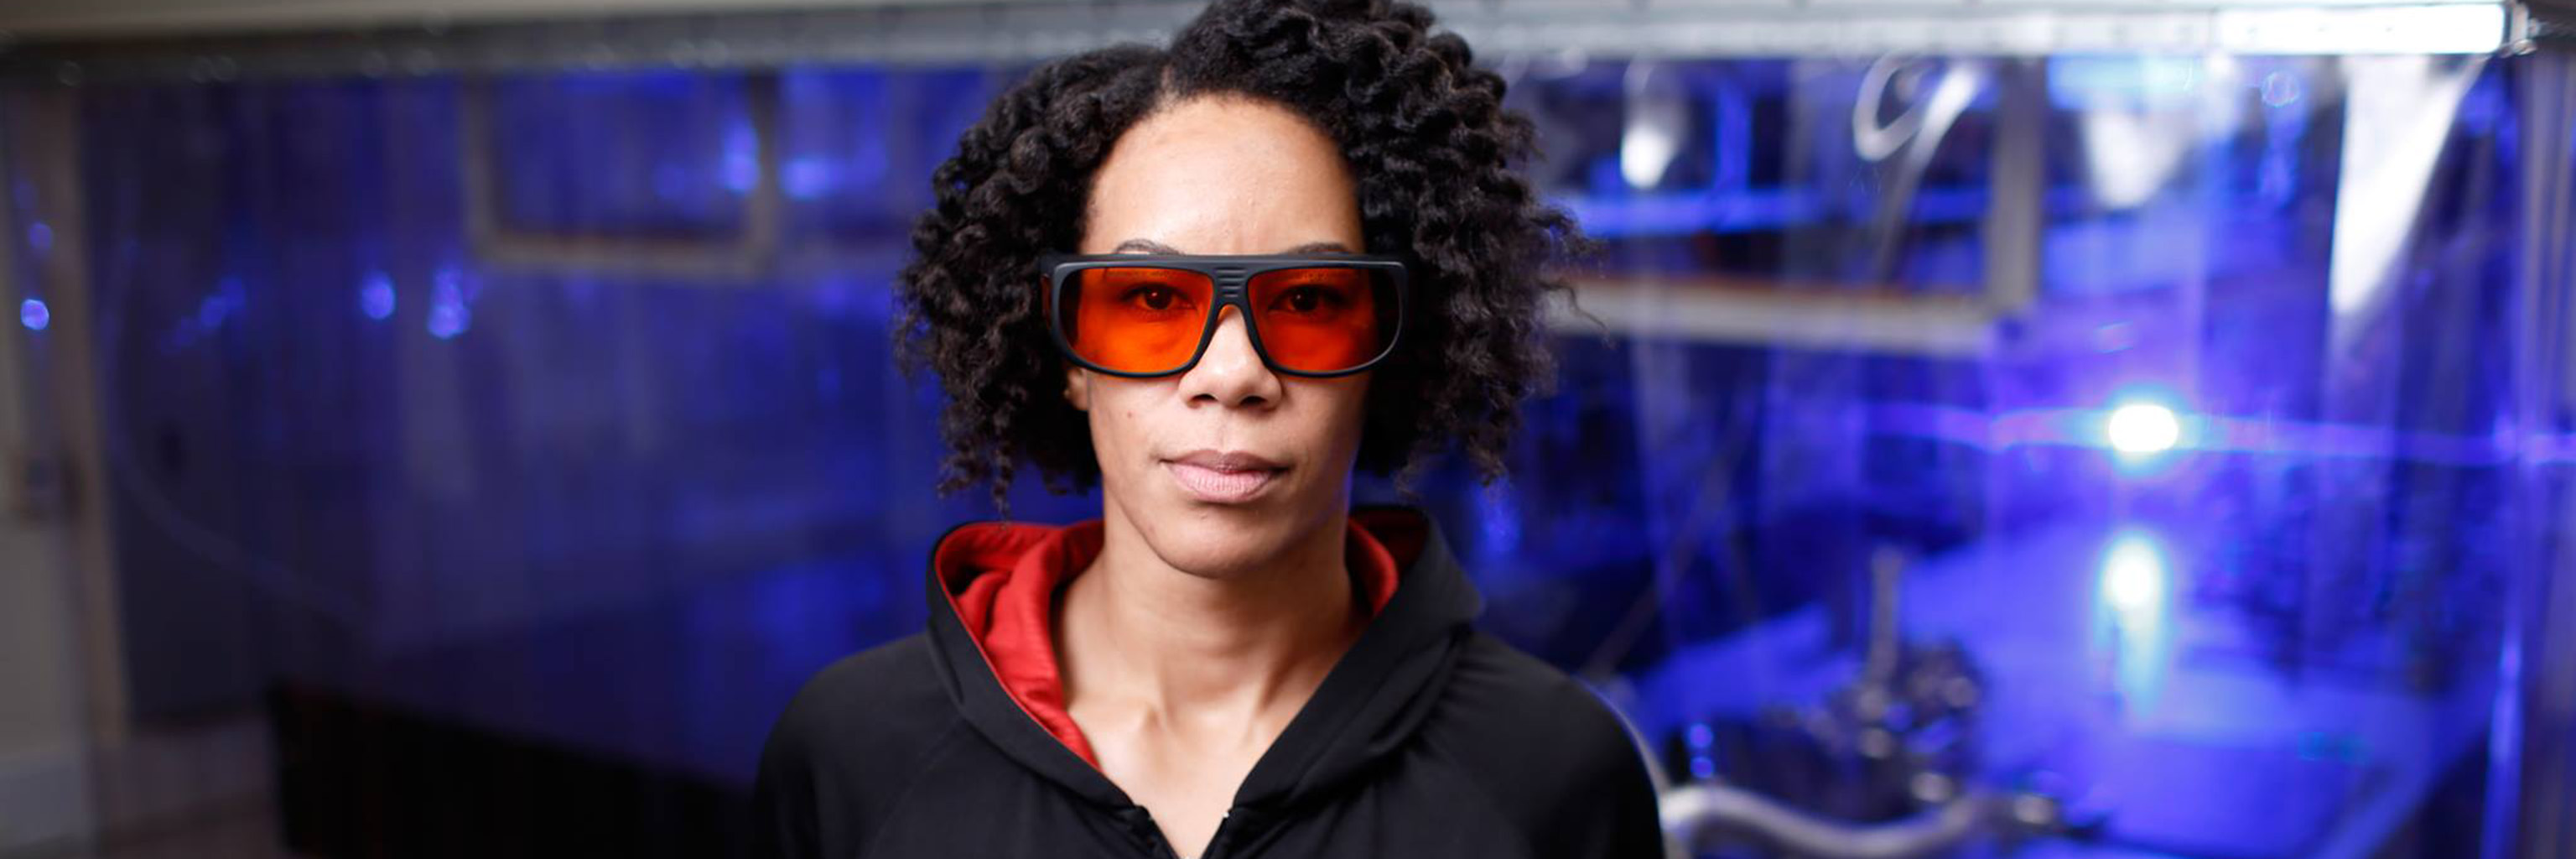 Woman wearing protective lab glasses